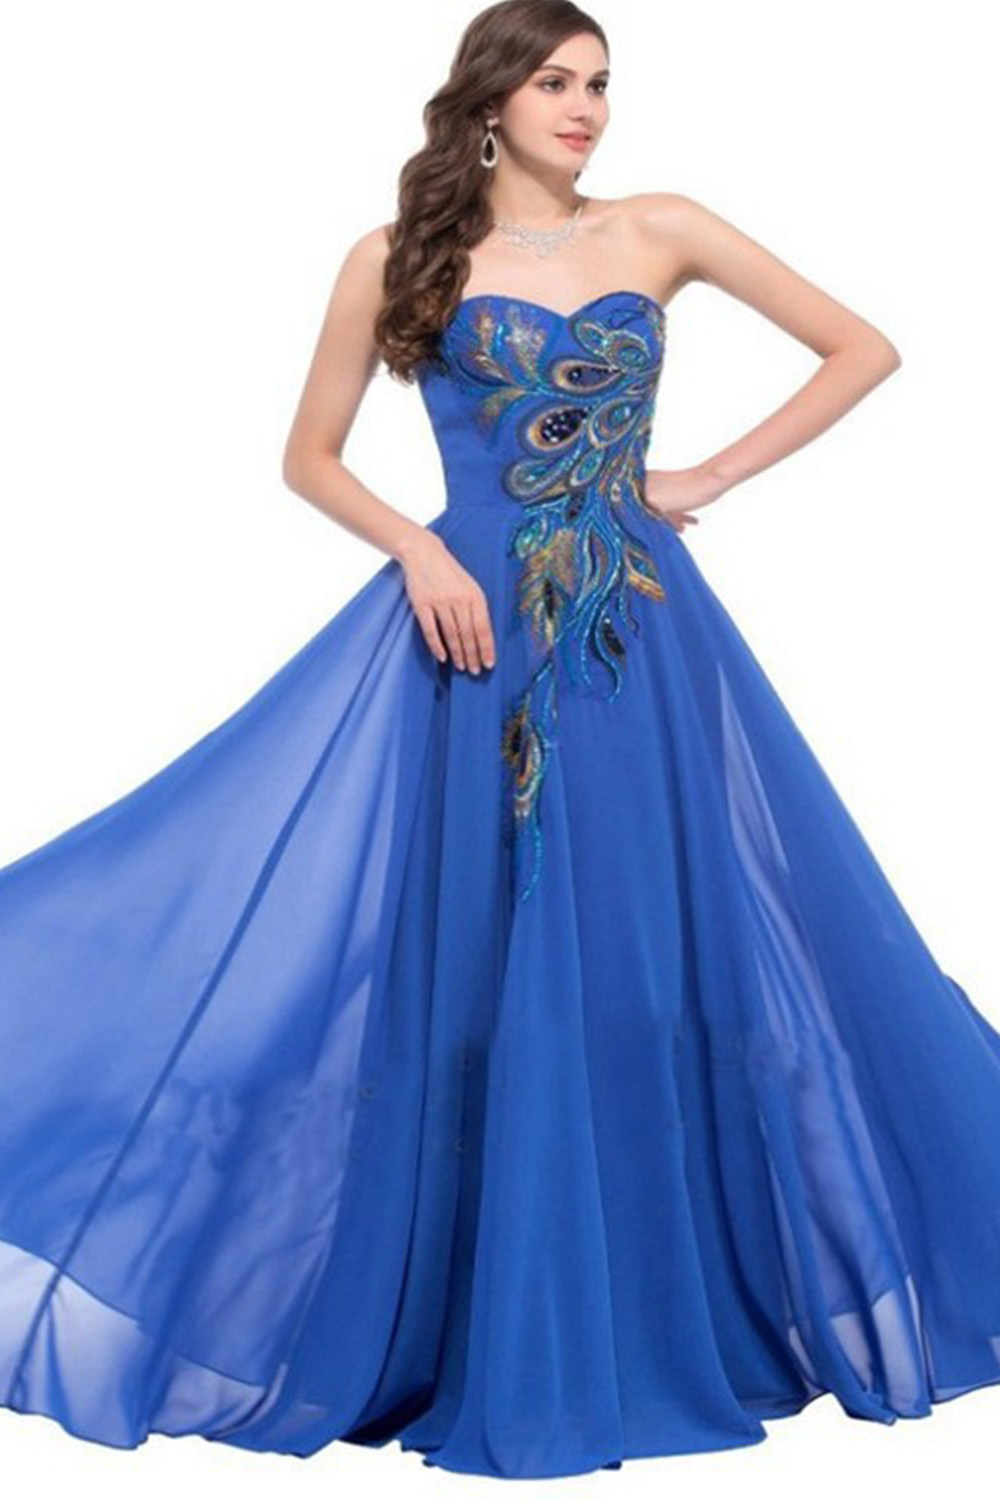 Prom Royal Blue Embroidery Peacock Strapless Maxi Dress